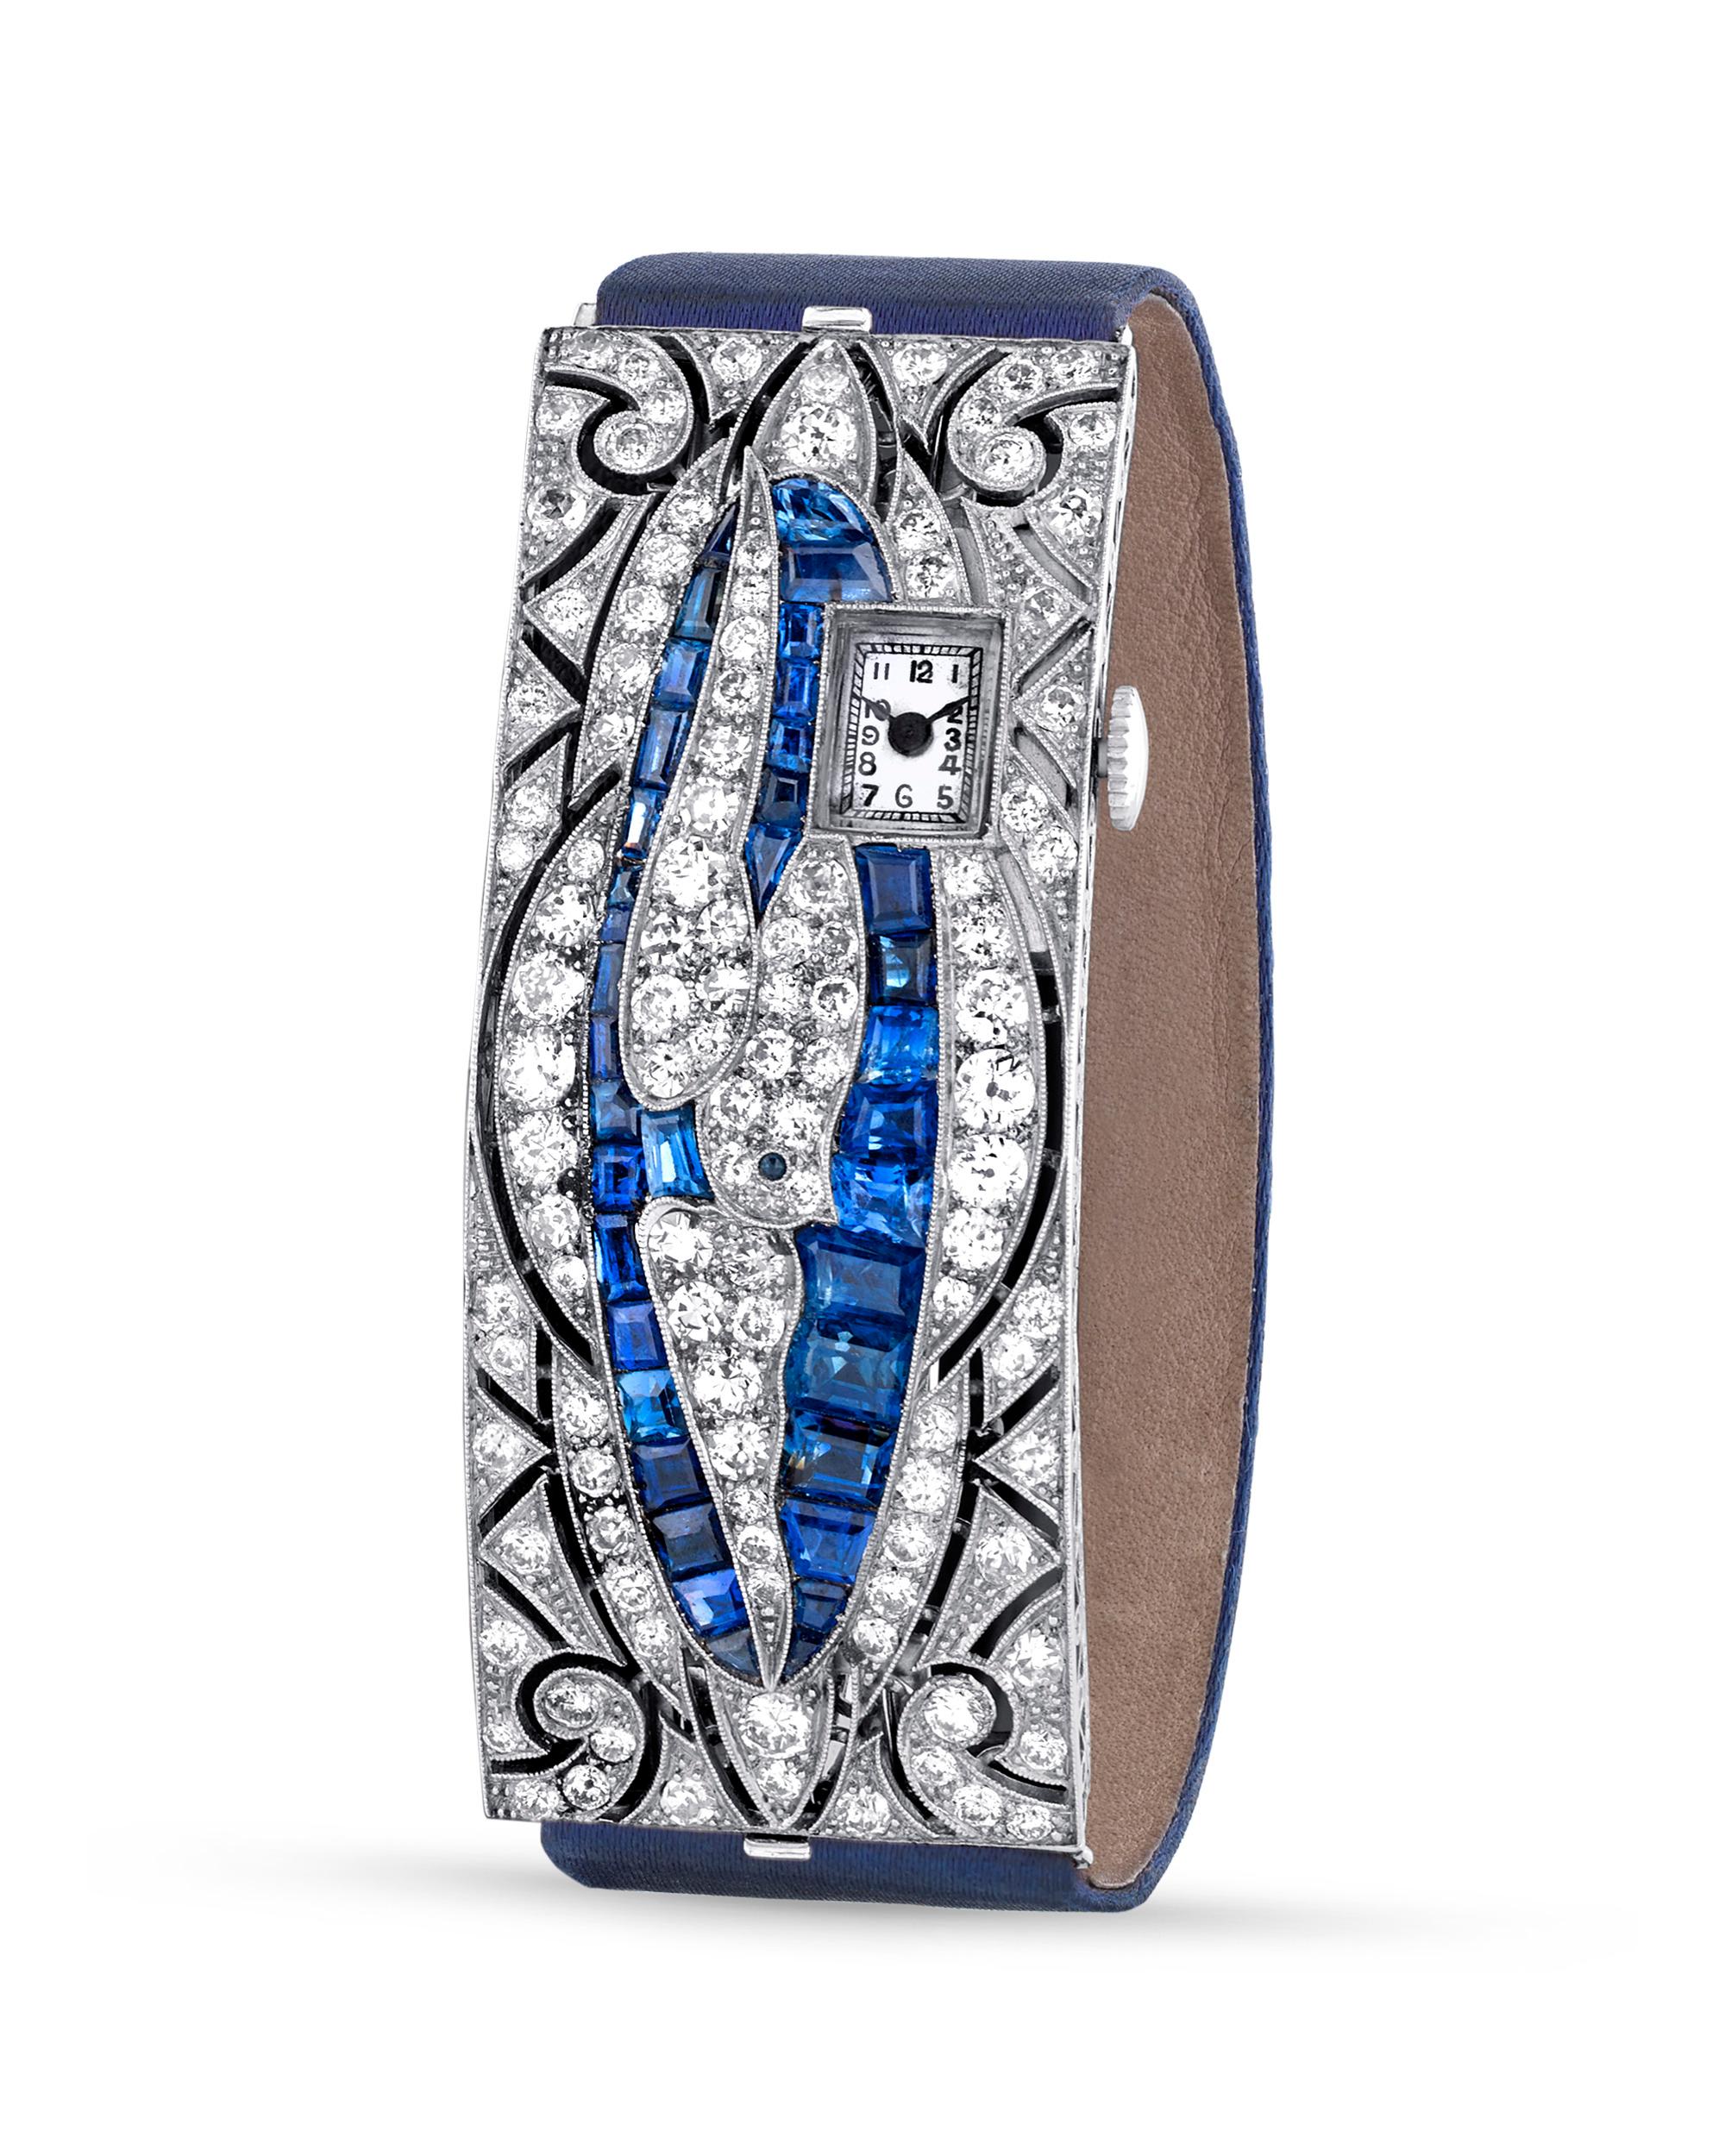 This remarkable Art Deco creation from the high-end Italian jeweler Bulgari is a truly exceptional timepiece. An array of old European-cut white diamonds and emerald-cut sapphires adorn the watch, which is crafted of platinum. Together, the